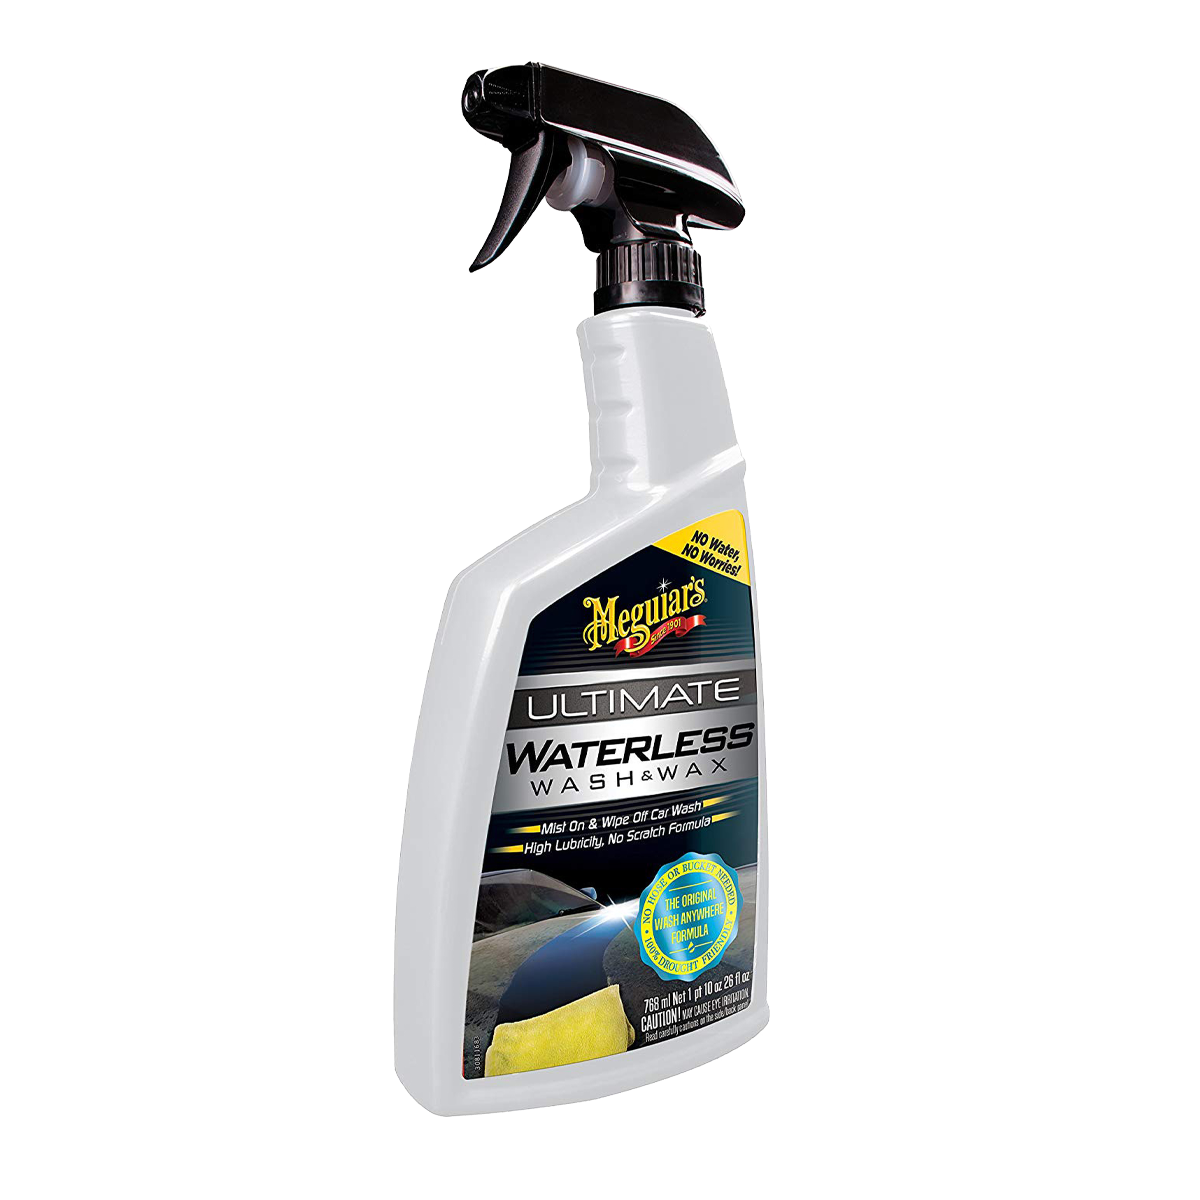 Meguiars Ultimate Waterless Wash & Wax - Limpeza a Seco